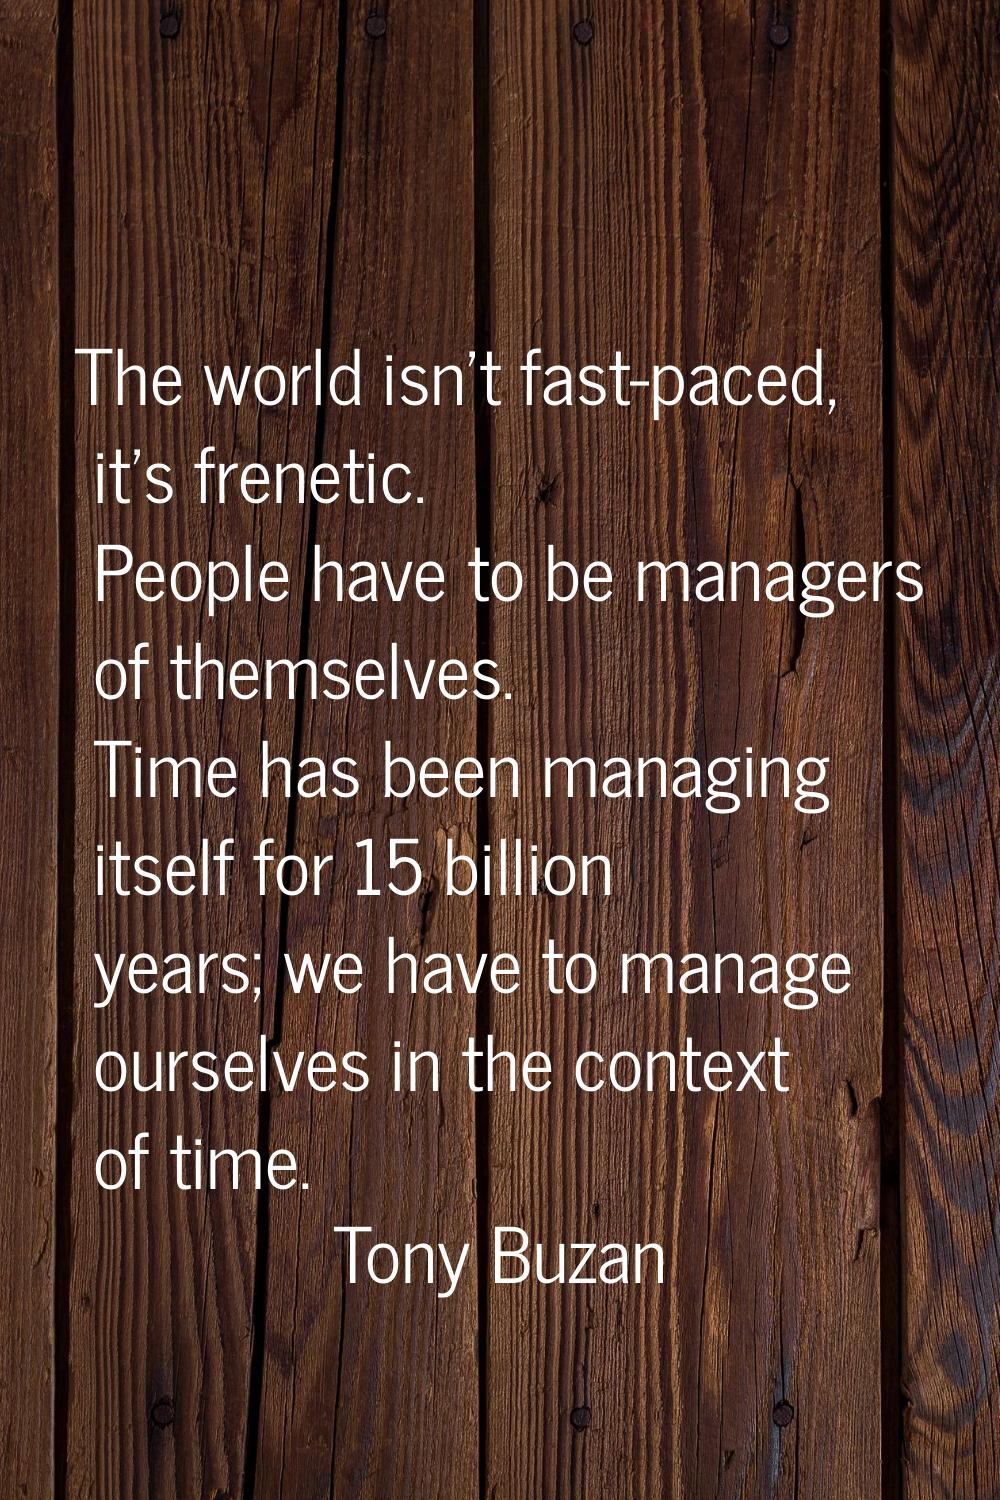 The world isn't fast-paced, it's frenetic. People have to be managers of themselves. Time has been 